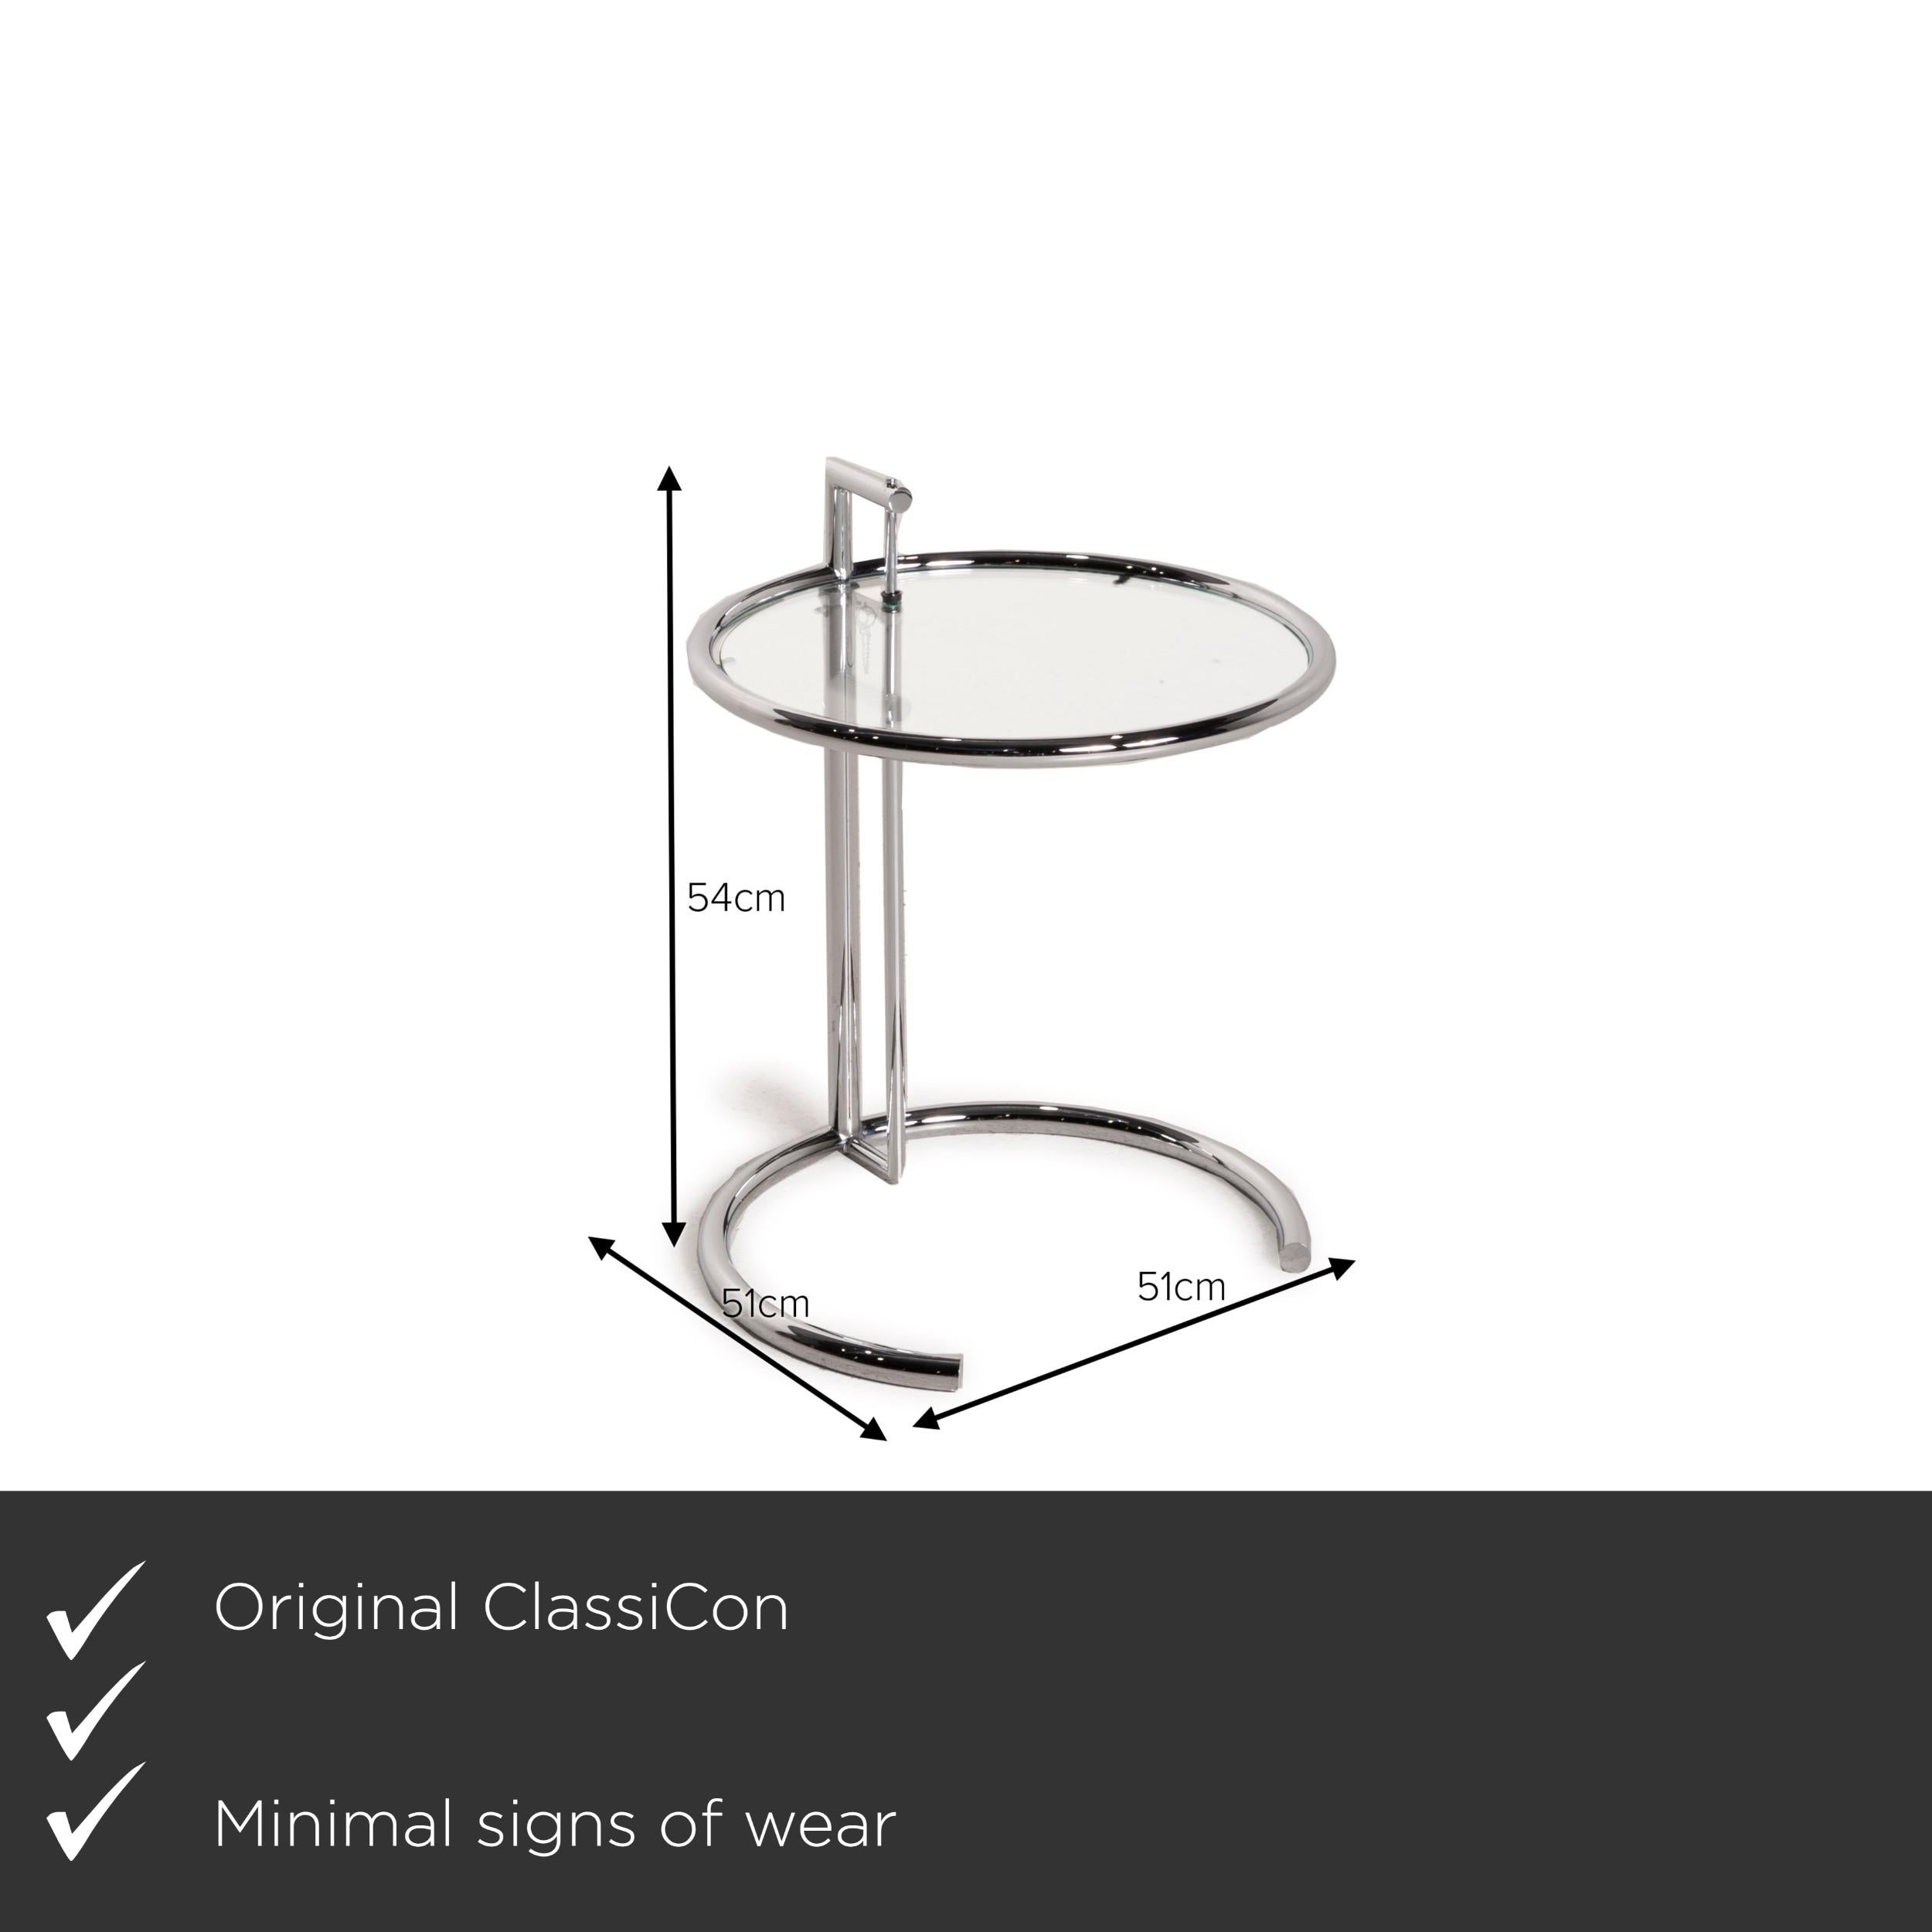 We present to you a ClassiCon adjustable table E1027 glass table side table chrome by Eileen Gray.

Product measurements in centimeters:

Depth: 51
Width: 51
Height: 54.







   